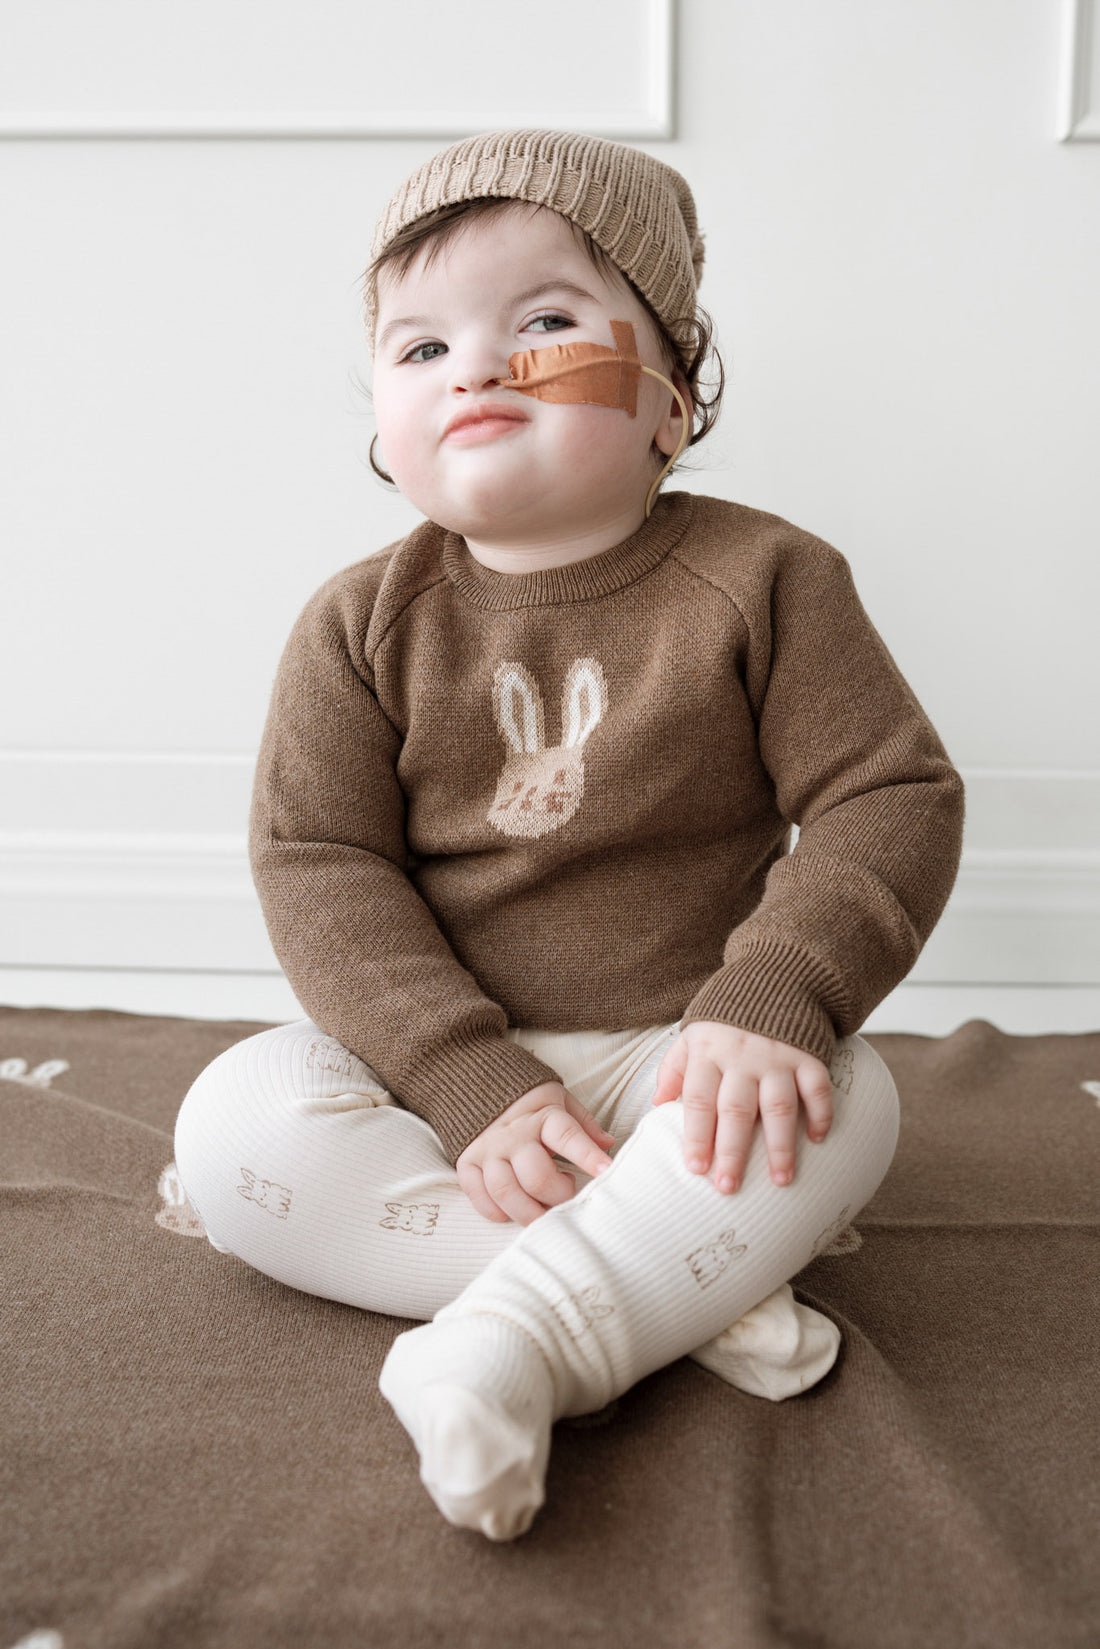 Ethan Jumper - Sepia Marle Childrens Jumper from Jamie Kay NZ